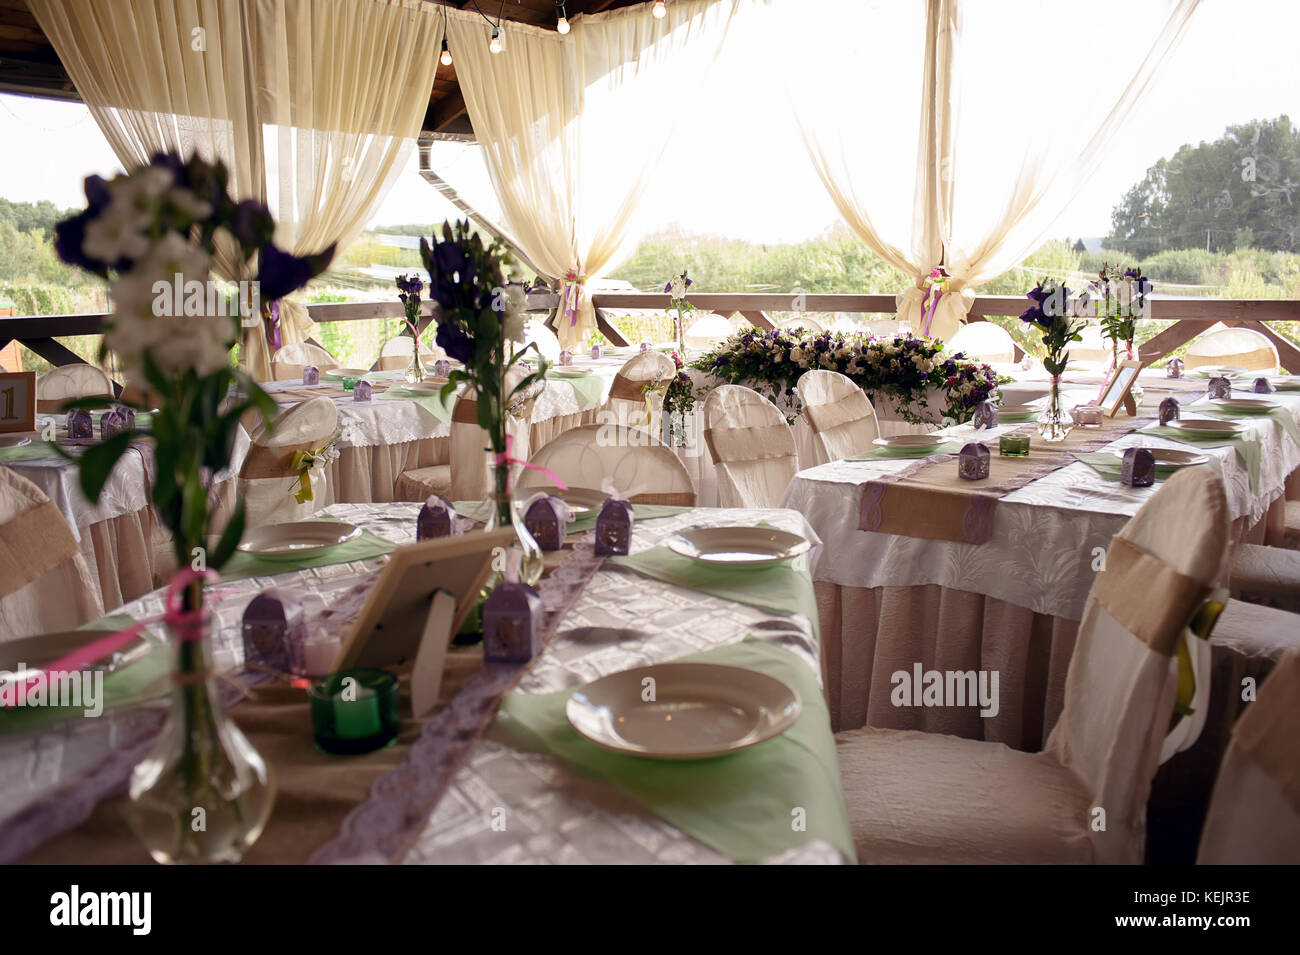 Beautifully decorated table for the wedding ceremony. Served banquet table decorated with fresh flowers in the open air. Stock Photo